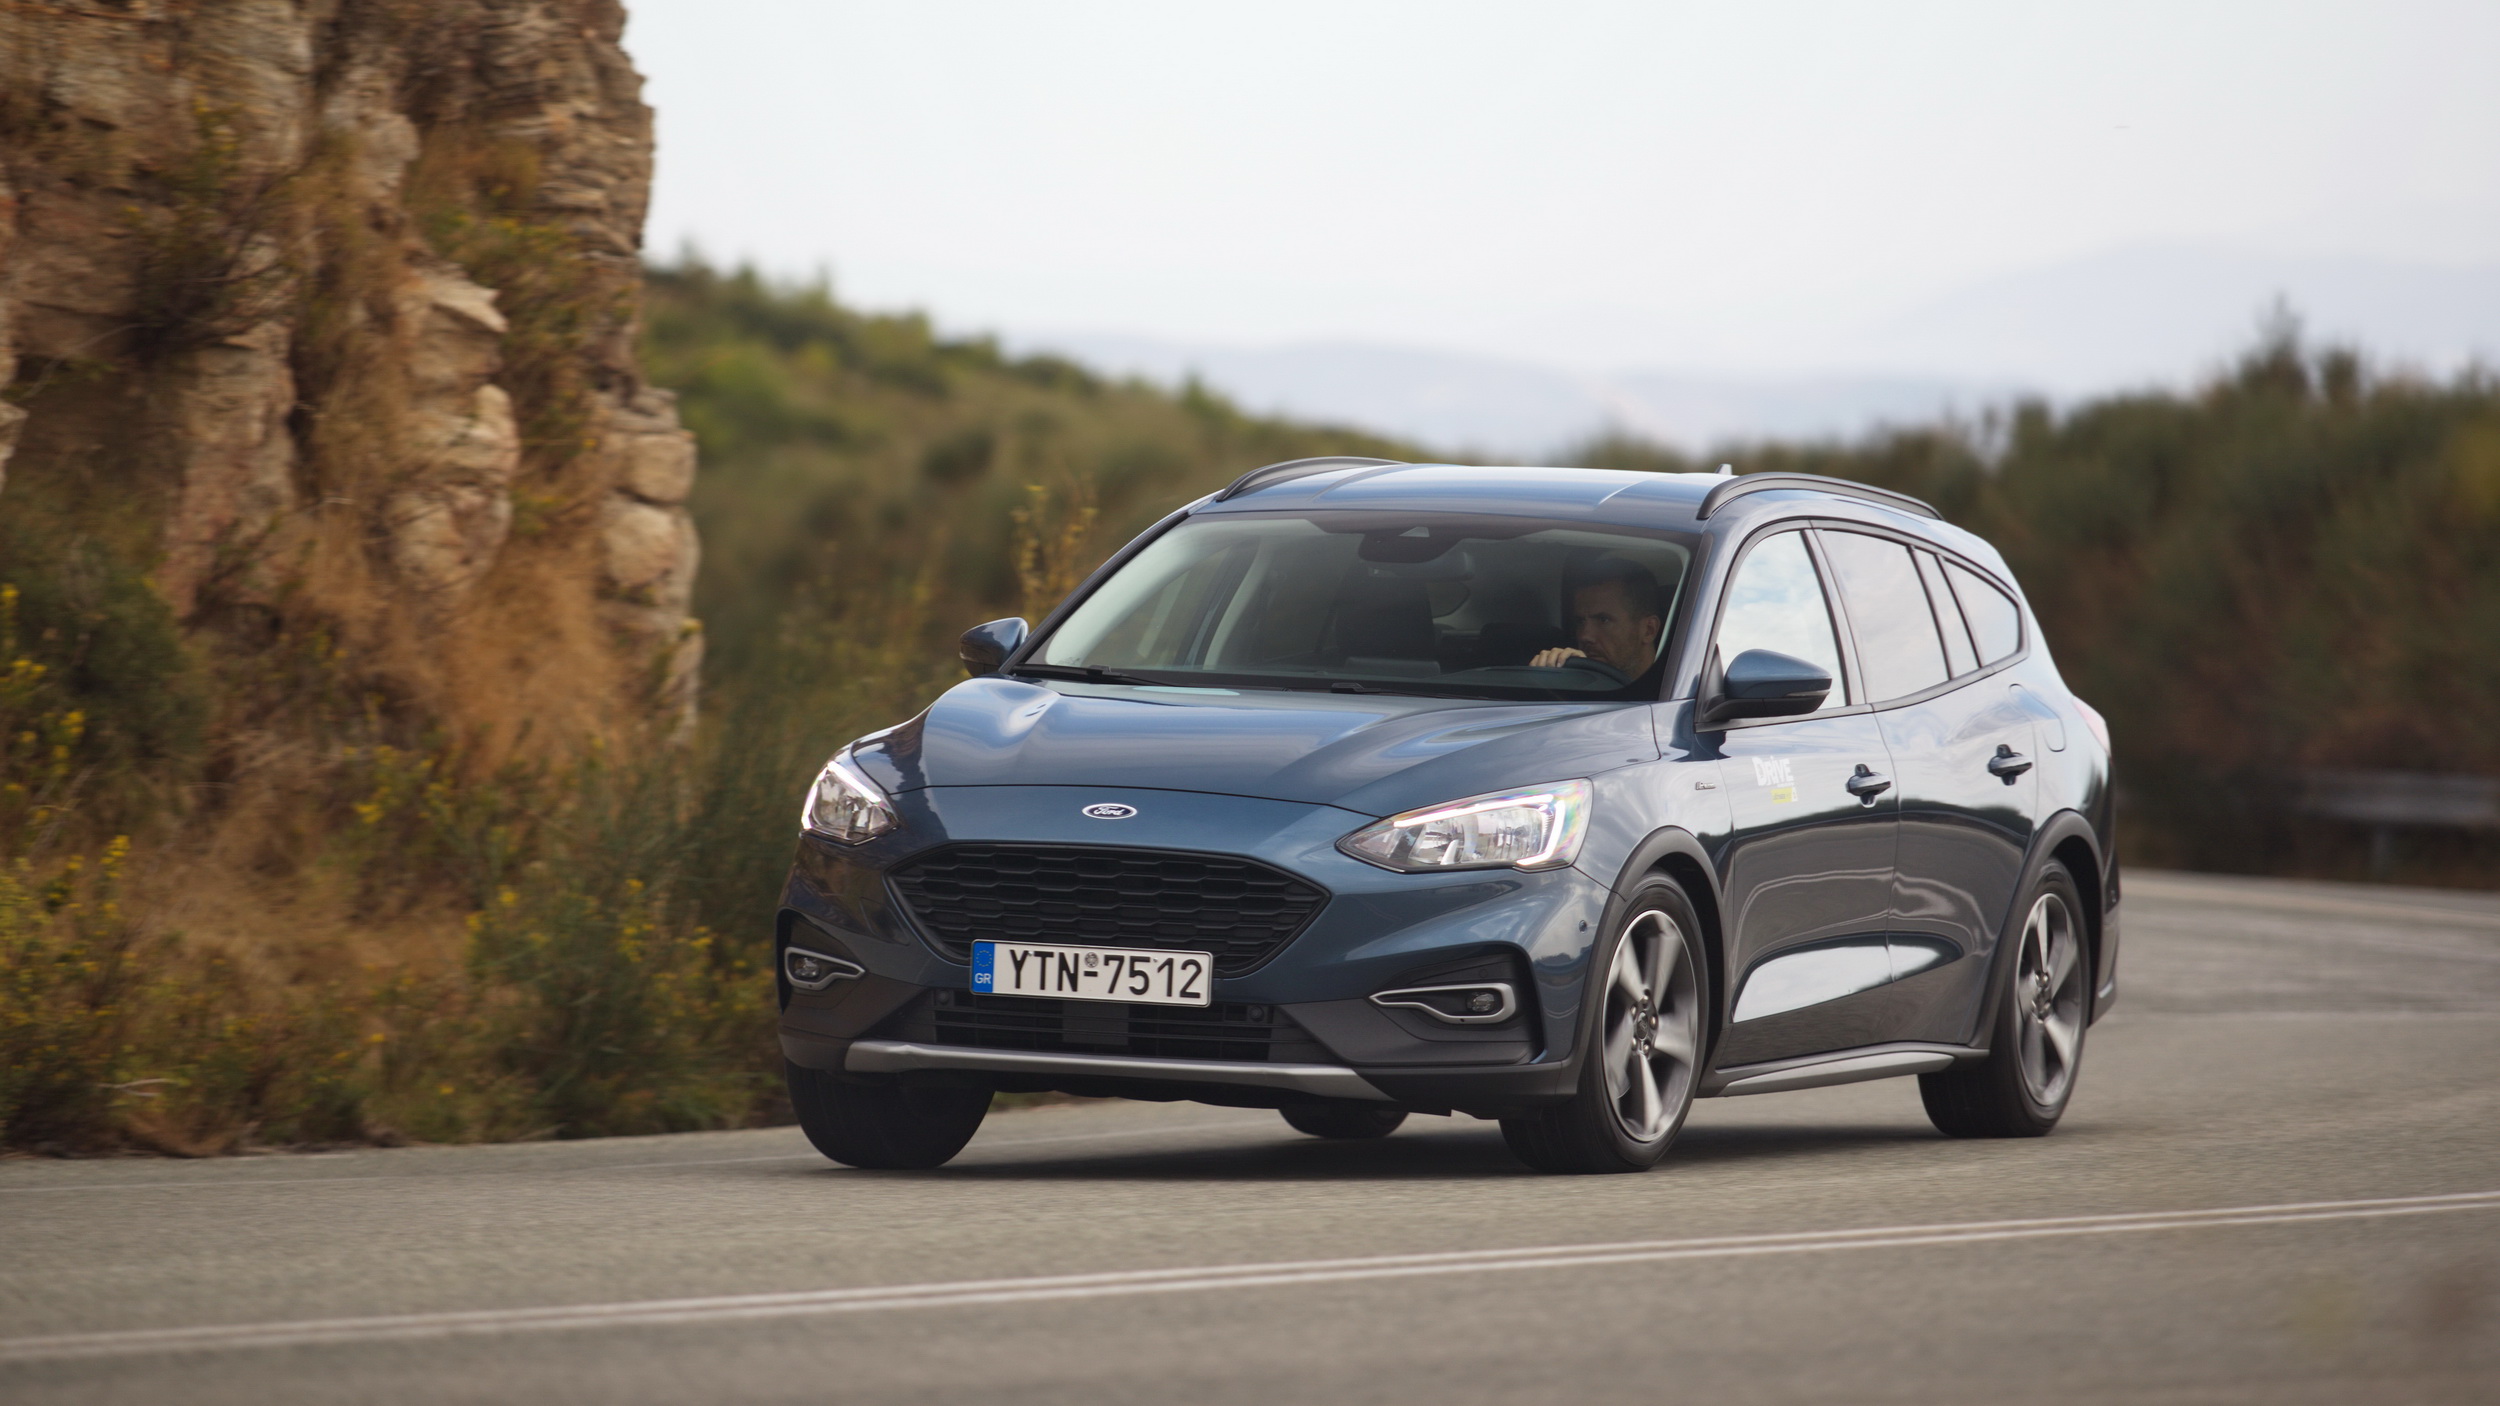 Test drive: Ford Focus Wagon Active 1.5 EcoBoost 150 PS